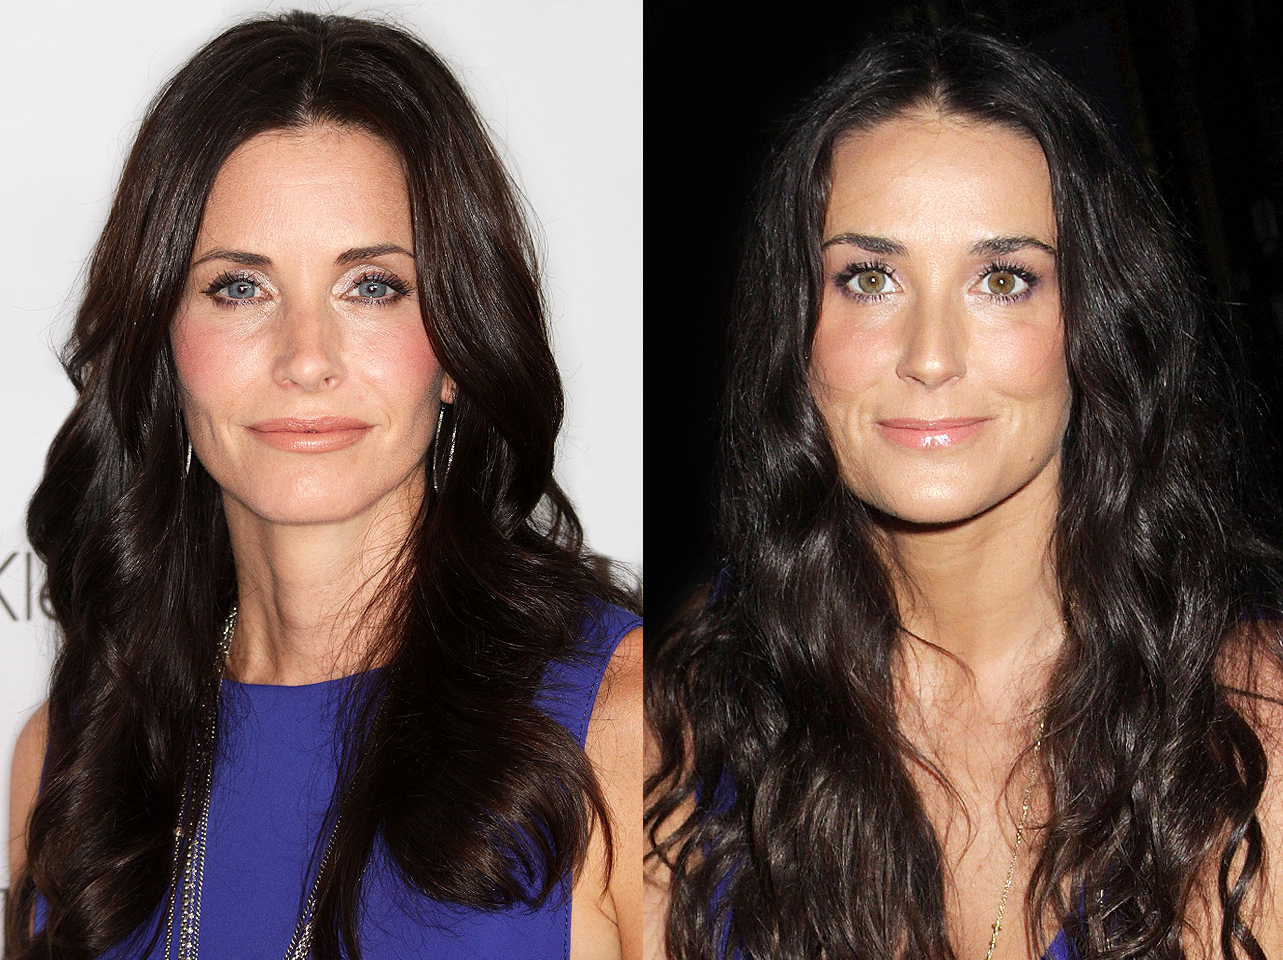 Courteney Cox and Demi Moore | Source: Getty Images